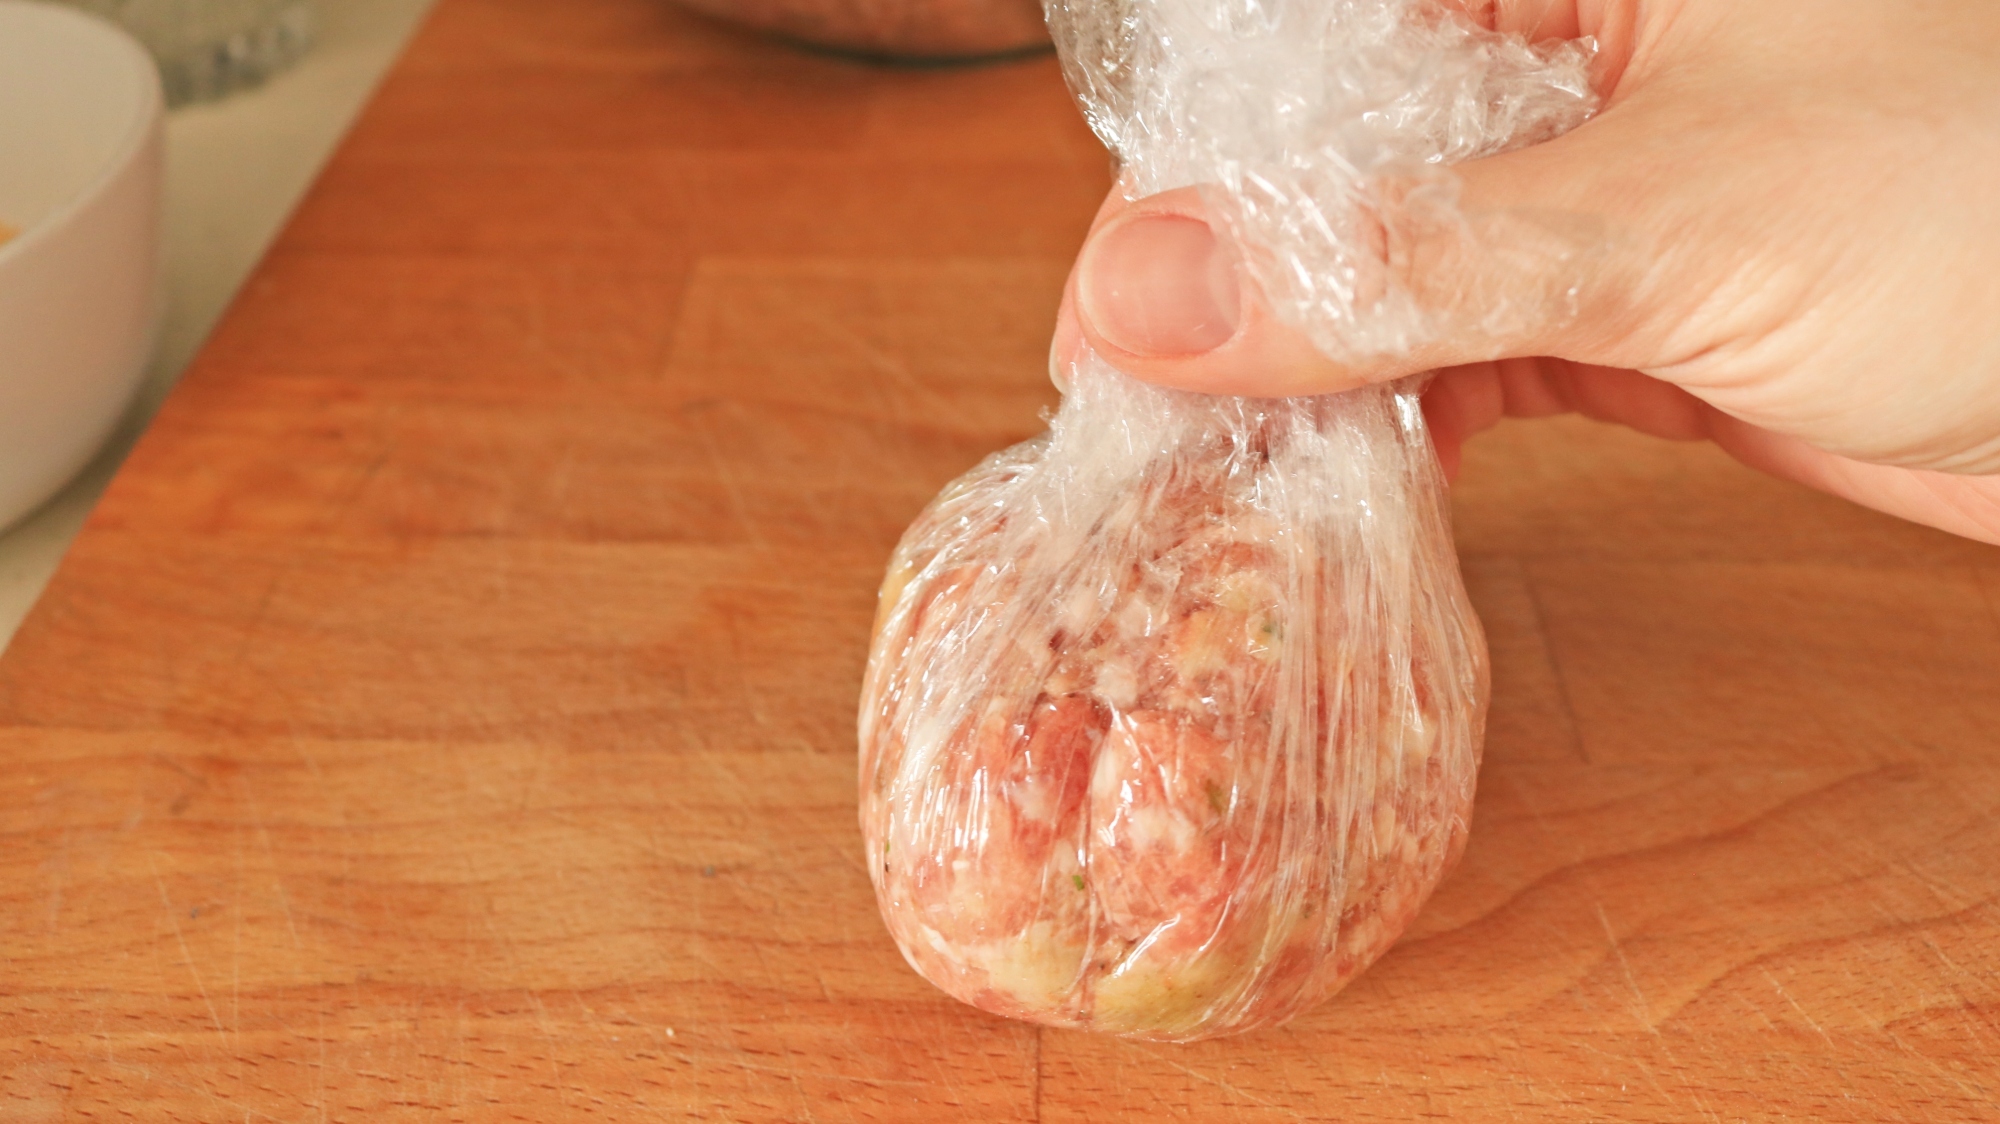 Plastic wrap with a ball of sausage inside